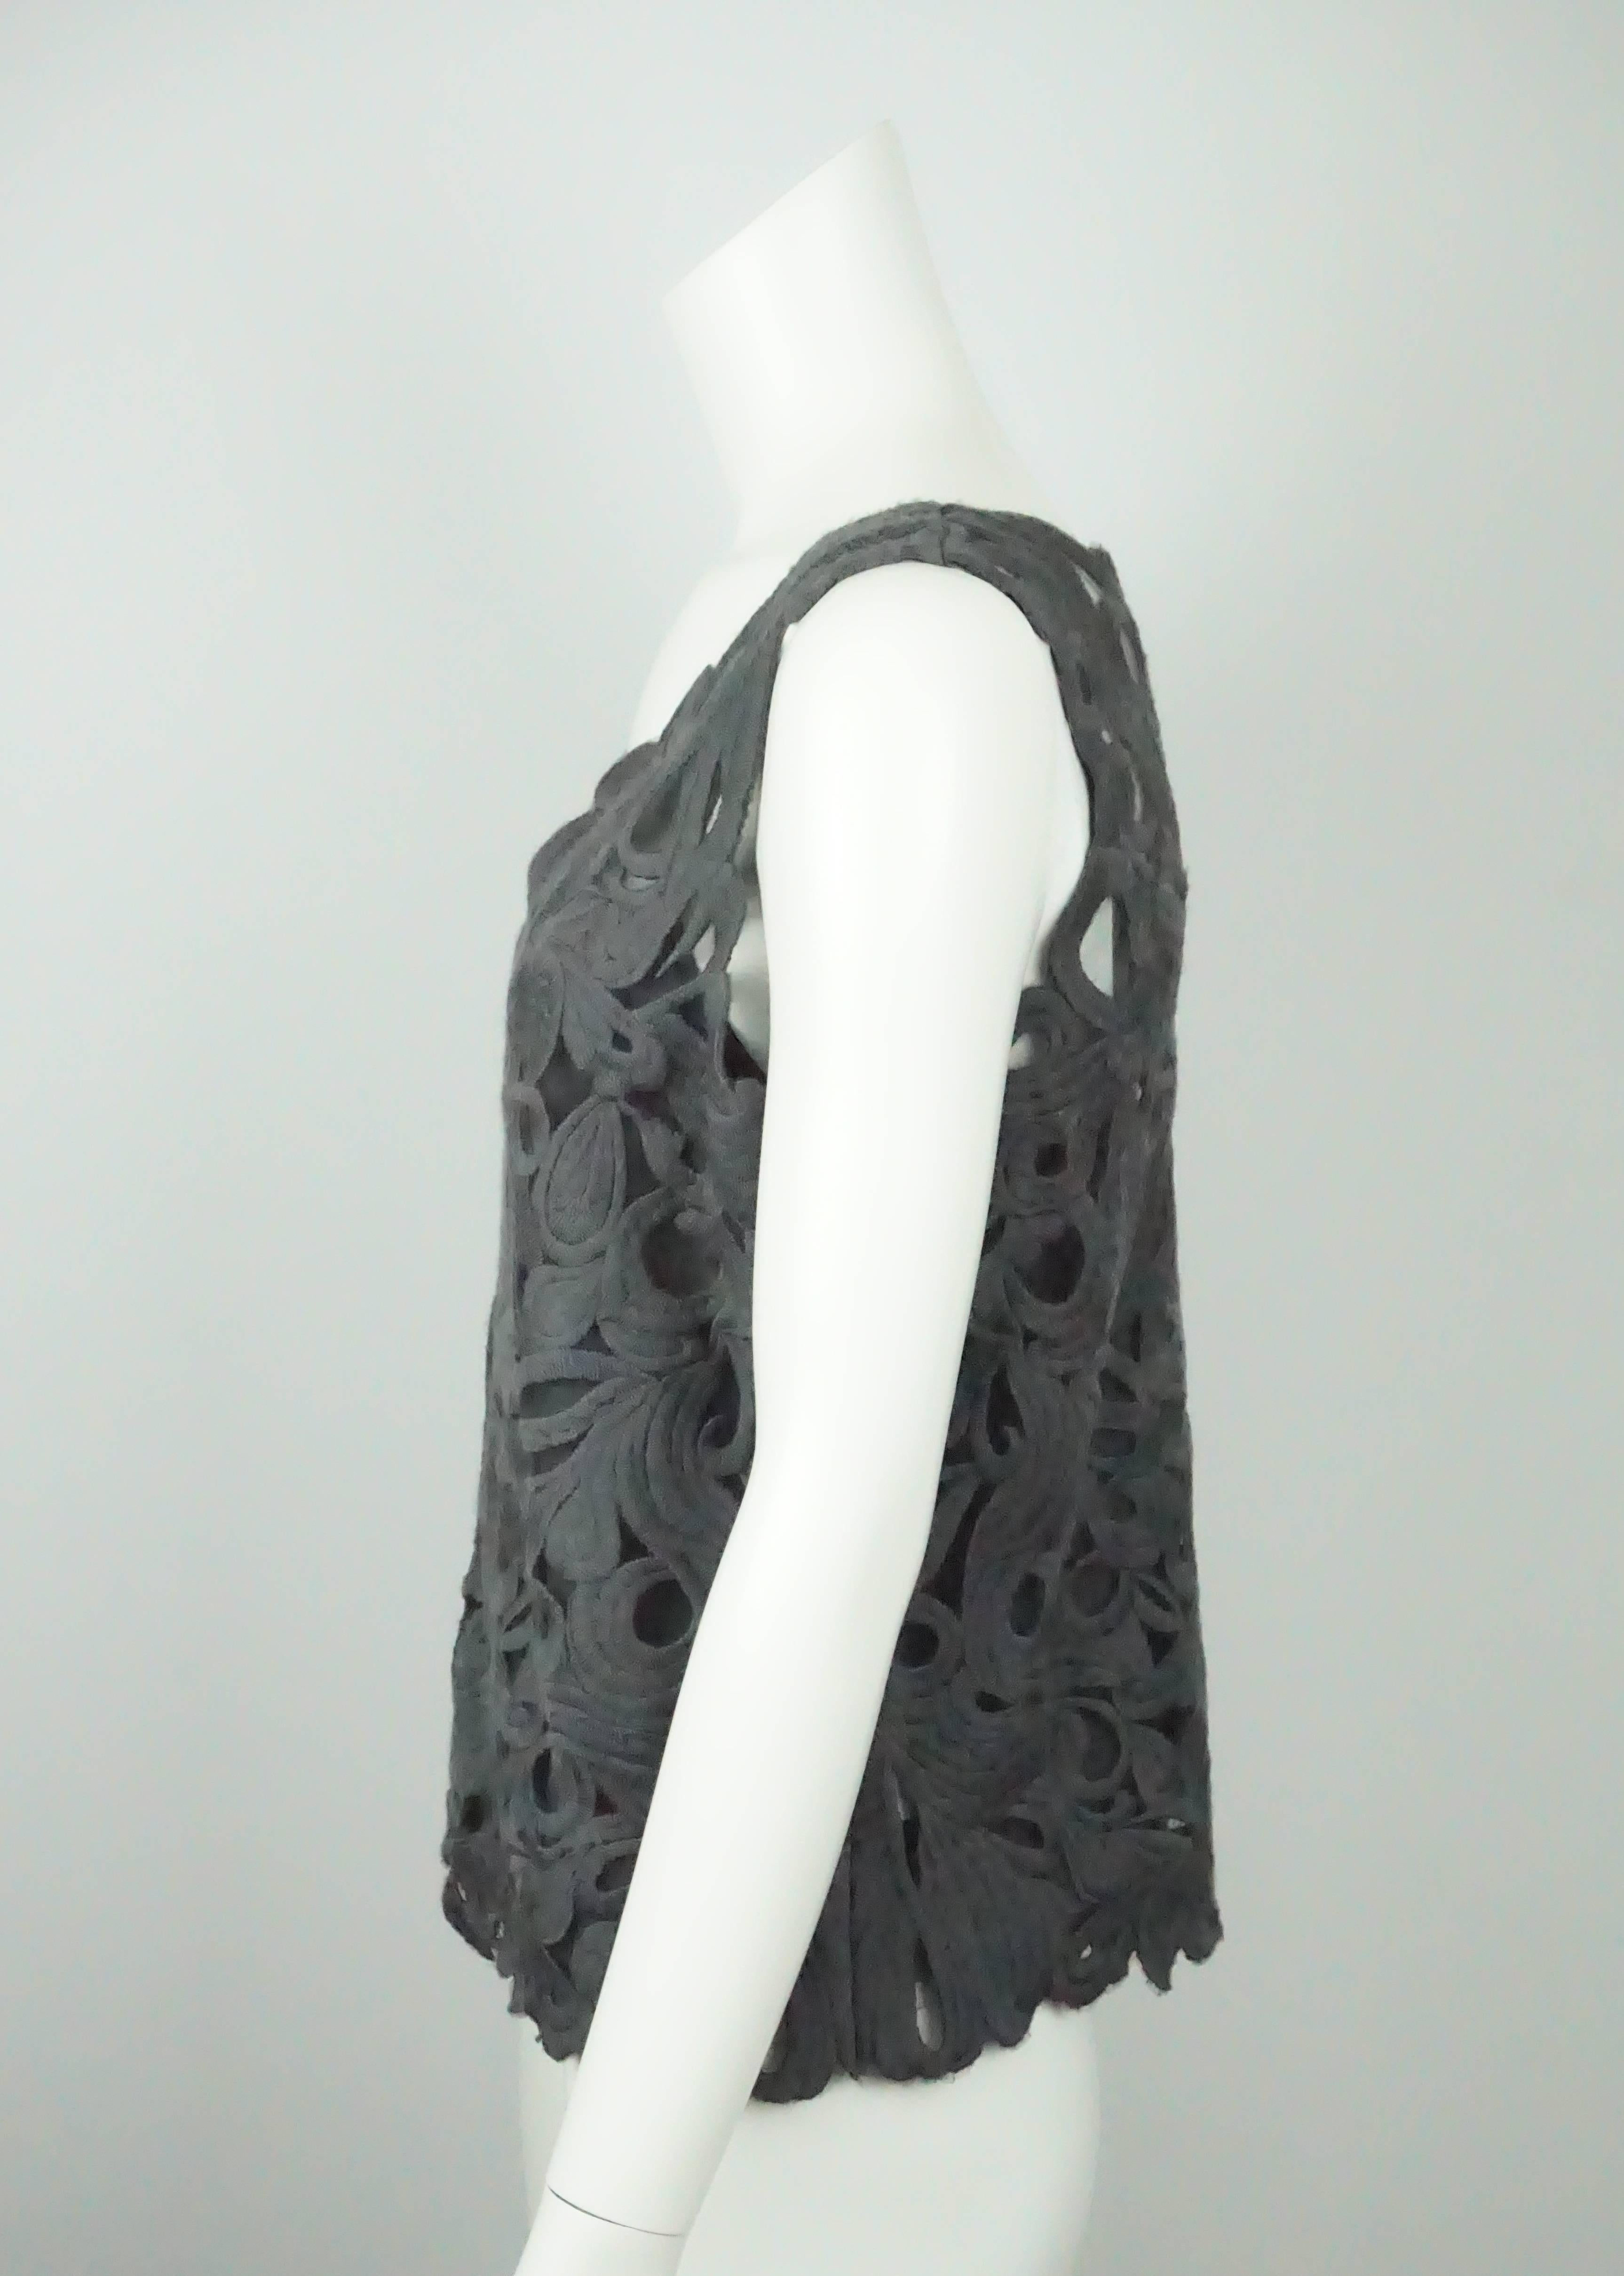 Les Copains Grey Wool Lace Sleeveless Top - 46  This gorgeous top is new with tags. It is sleeveless and has a beautiful cutout detail to it. There is a grey cami underneath the top. On the left side of the top there is also a zipper. 
Measurements